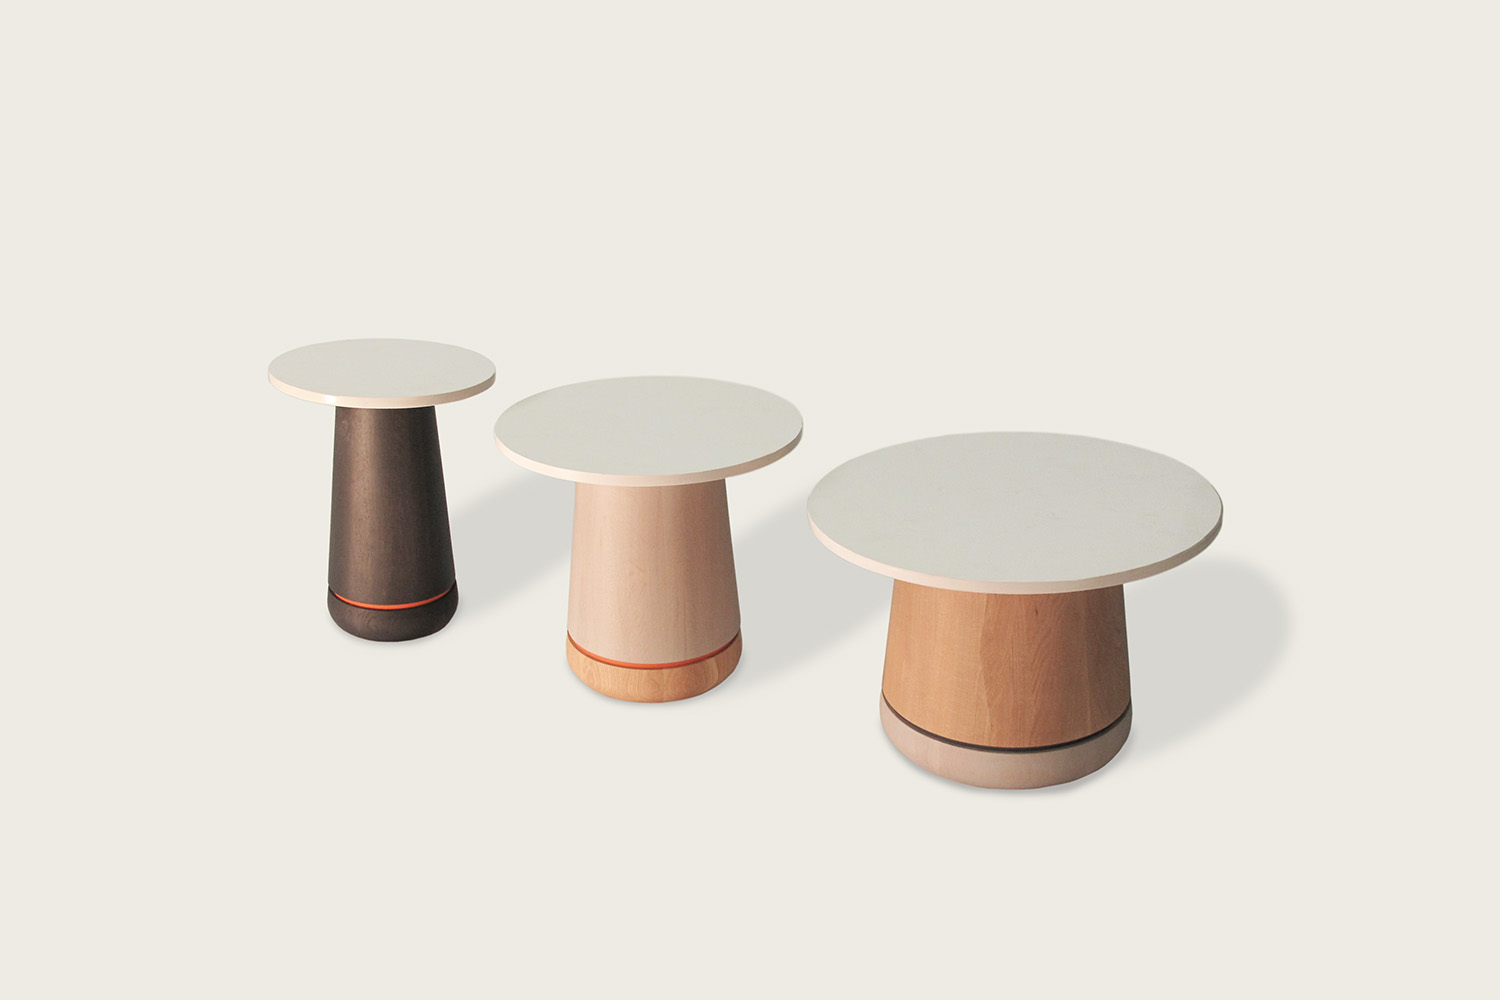 Phase Cocktail Tables in oak with quartz top - Speke Klein